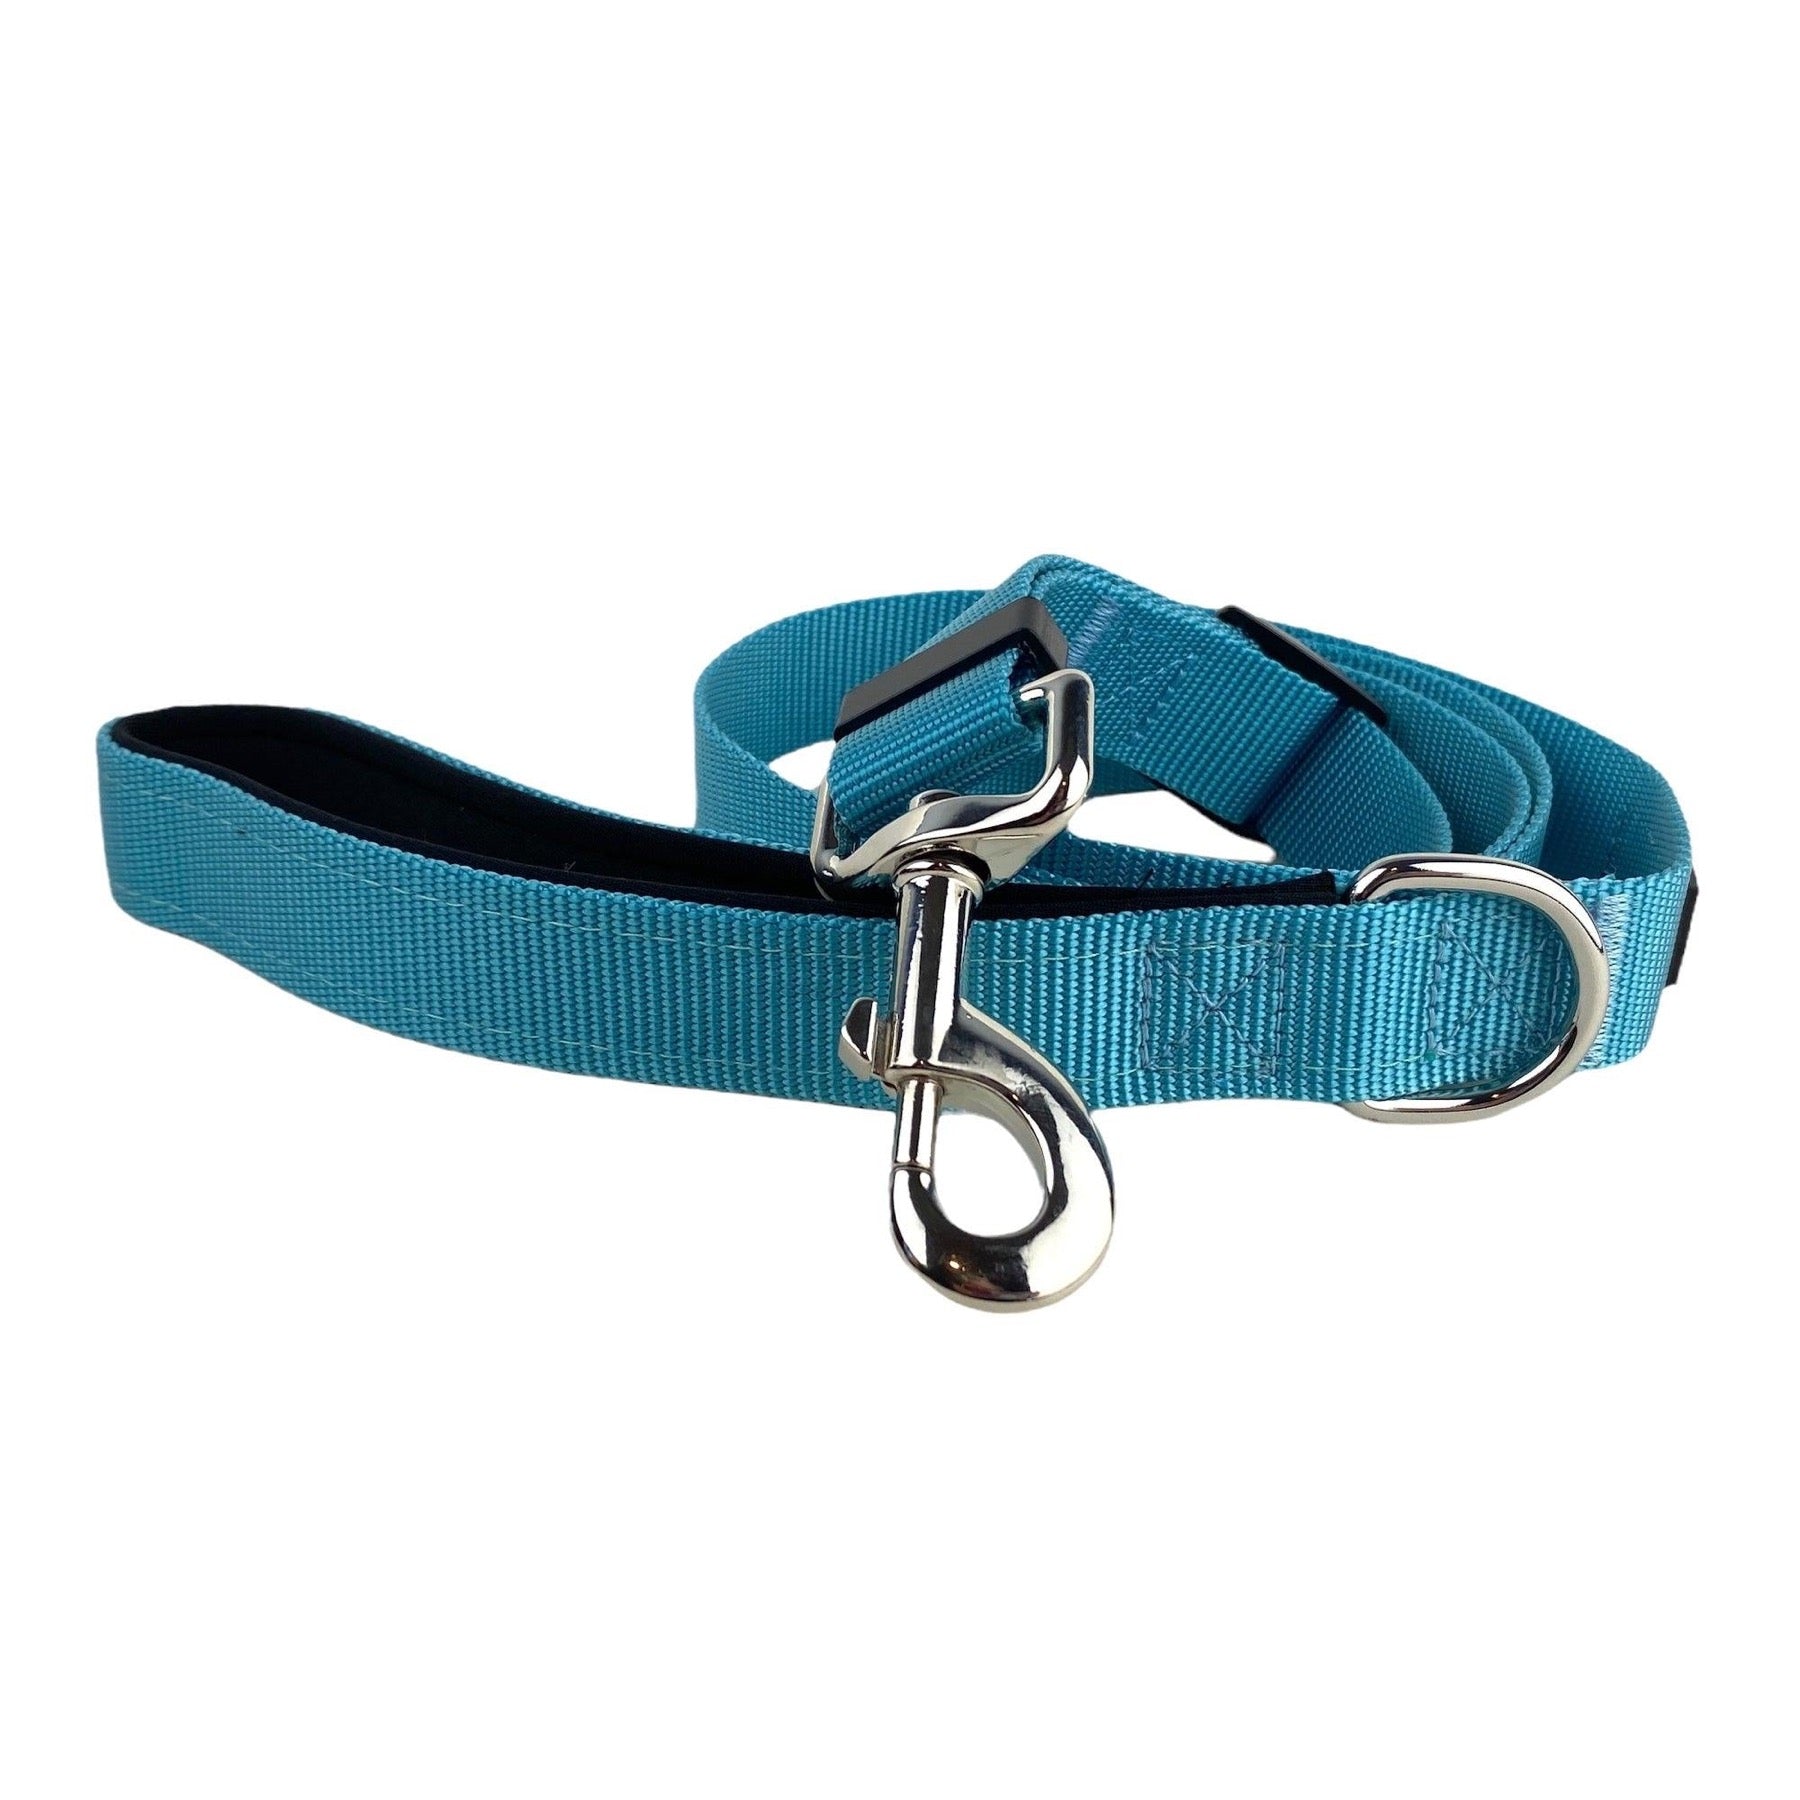 photo of a teal blue adjustable dog leash with a padded handle. Leash is rolled and showing snap hook at end. 